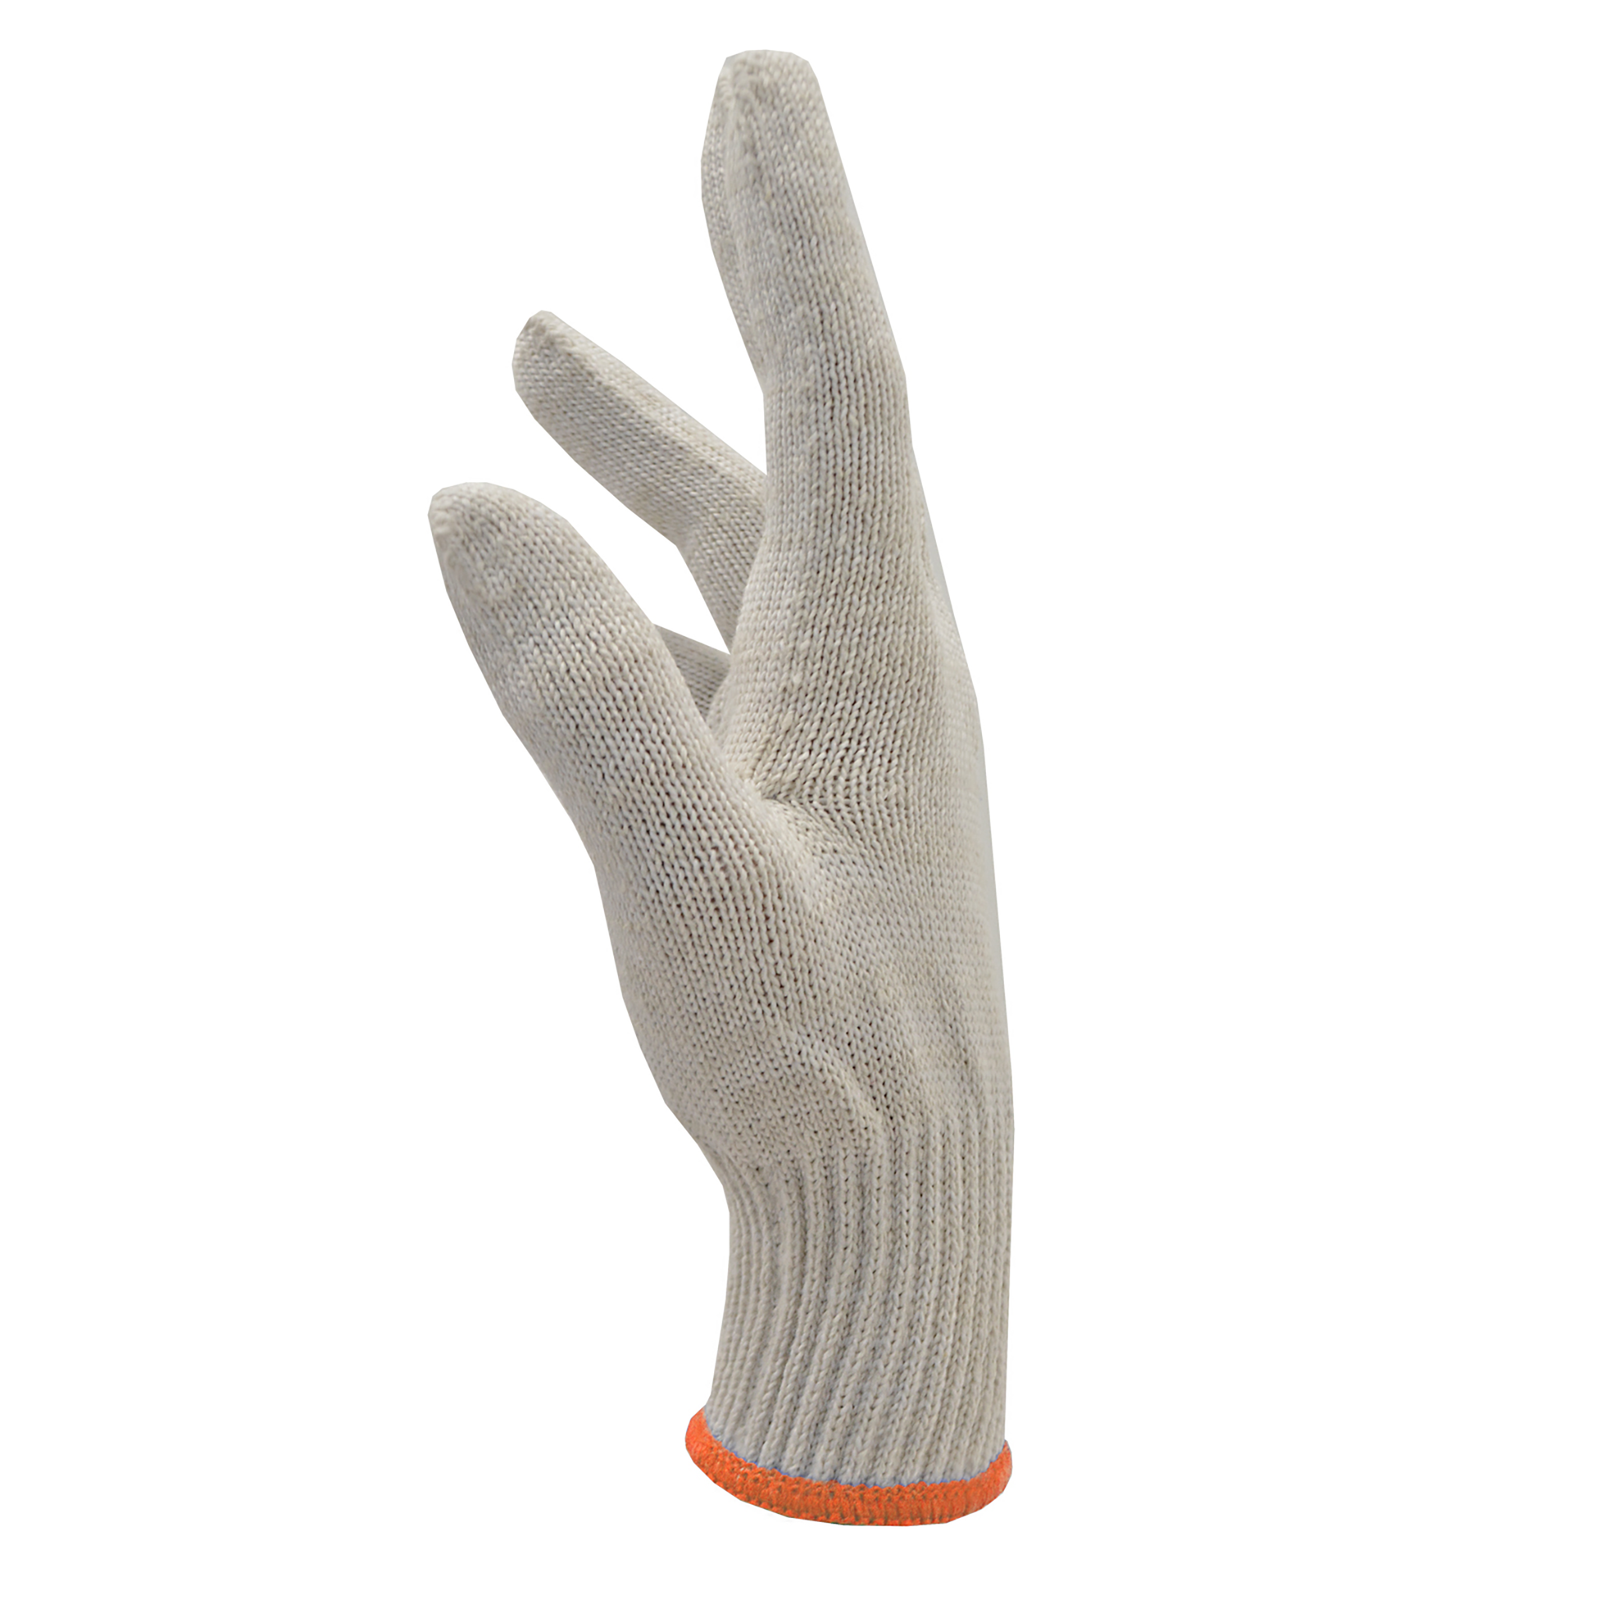 Safety knitted multipurpose white glove